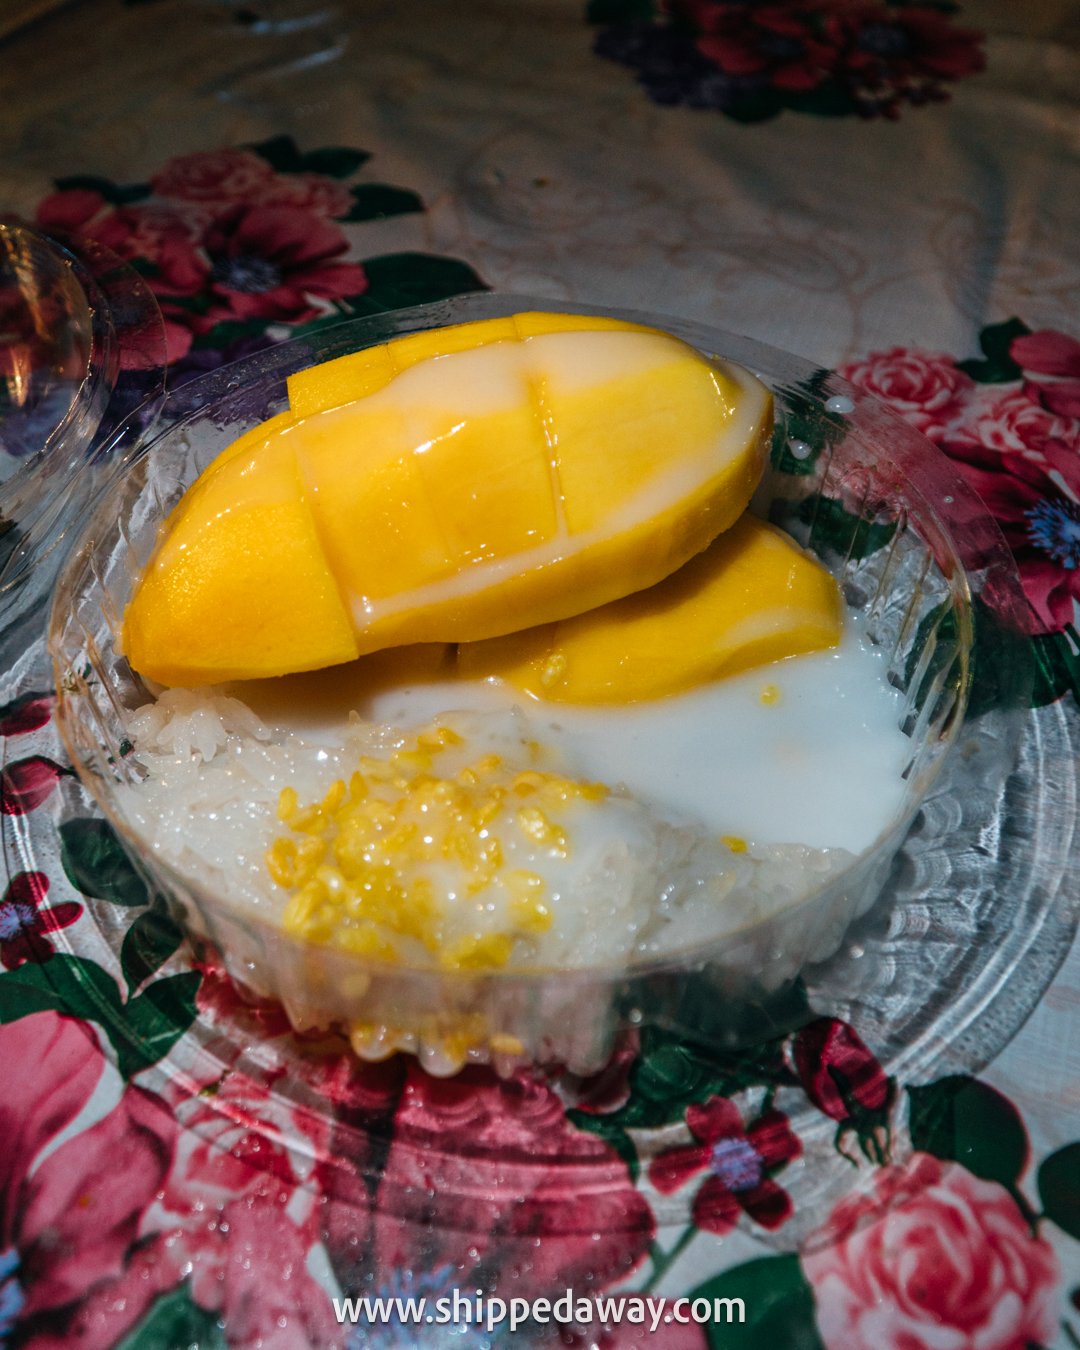 Where to eat in Chiang Mai - best foods to try in Chiang Mai - must-try food in Chiang Mai - mango sticky rice